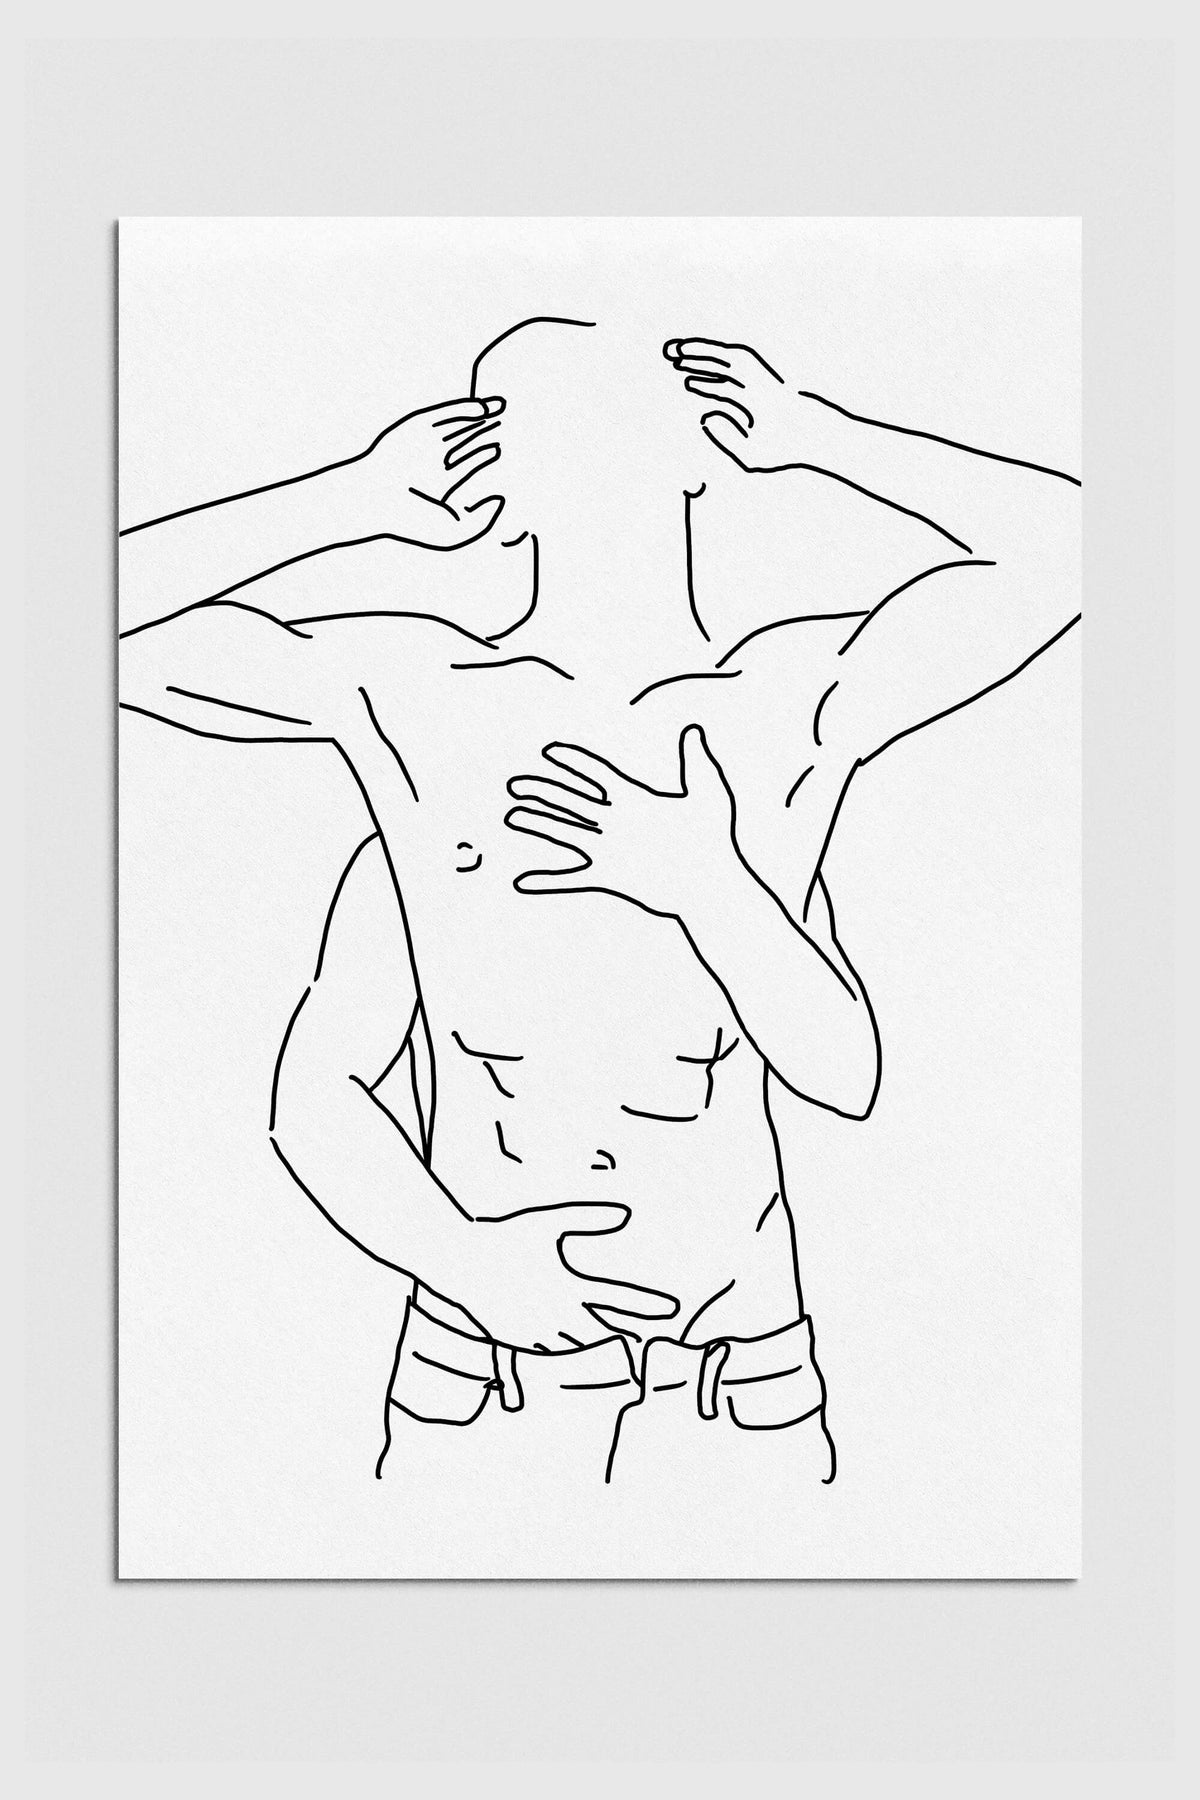 Monochrome line art featuring a sensual male couple in an intimate embrace, evoking elegance and passion. Perfect for lovers of gay art and monochromatic wall decor.